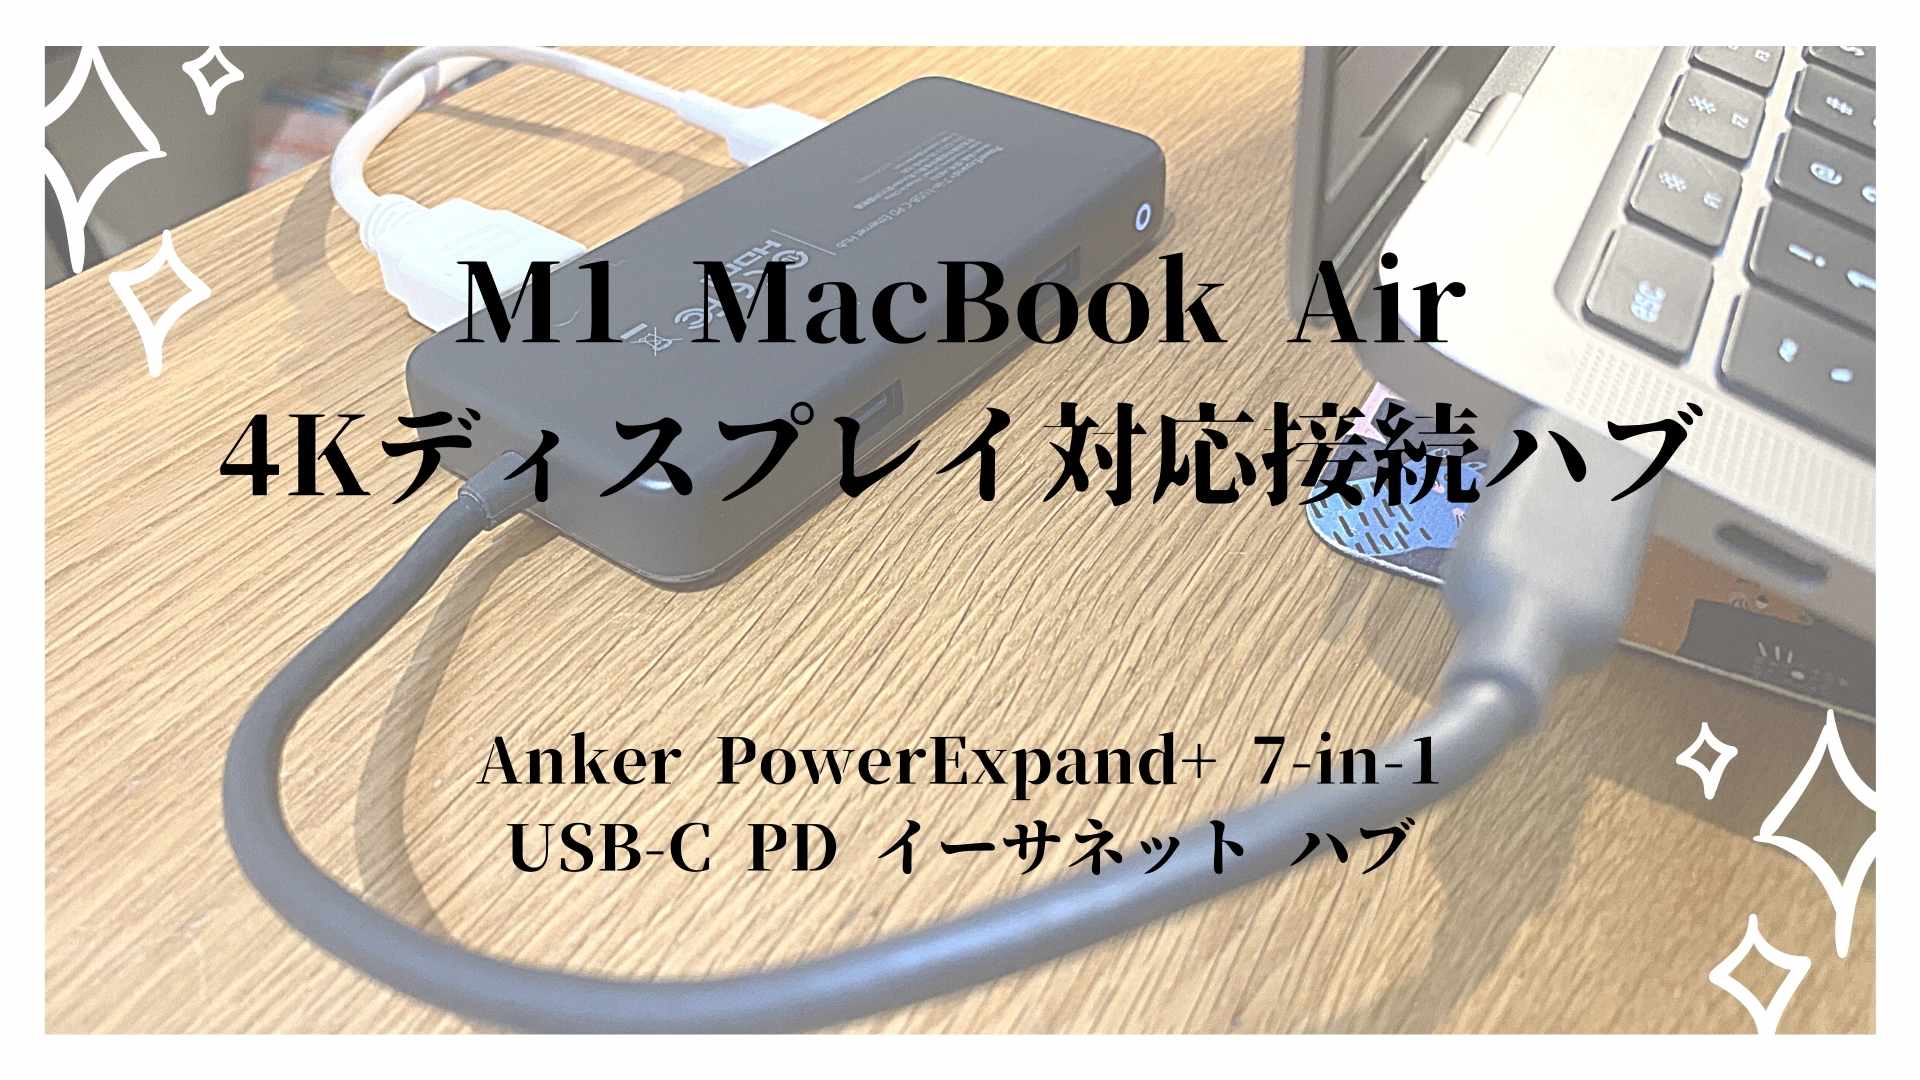 Anker PowerExpand+ 7-in-1　ハブ